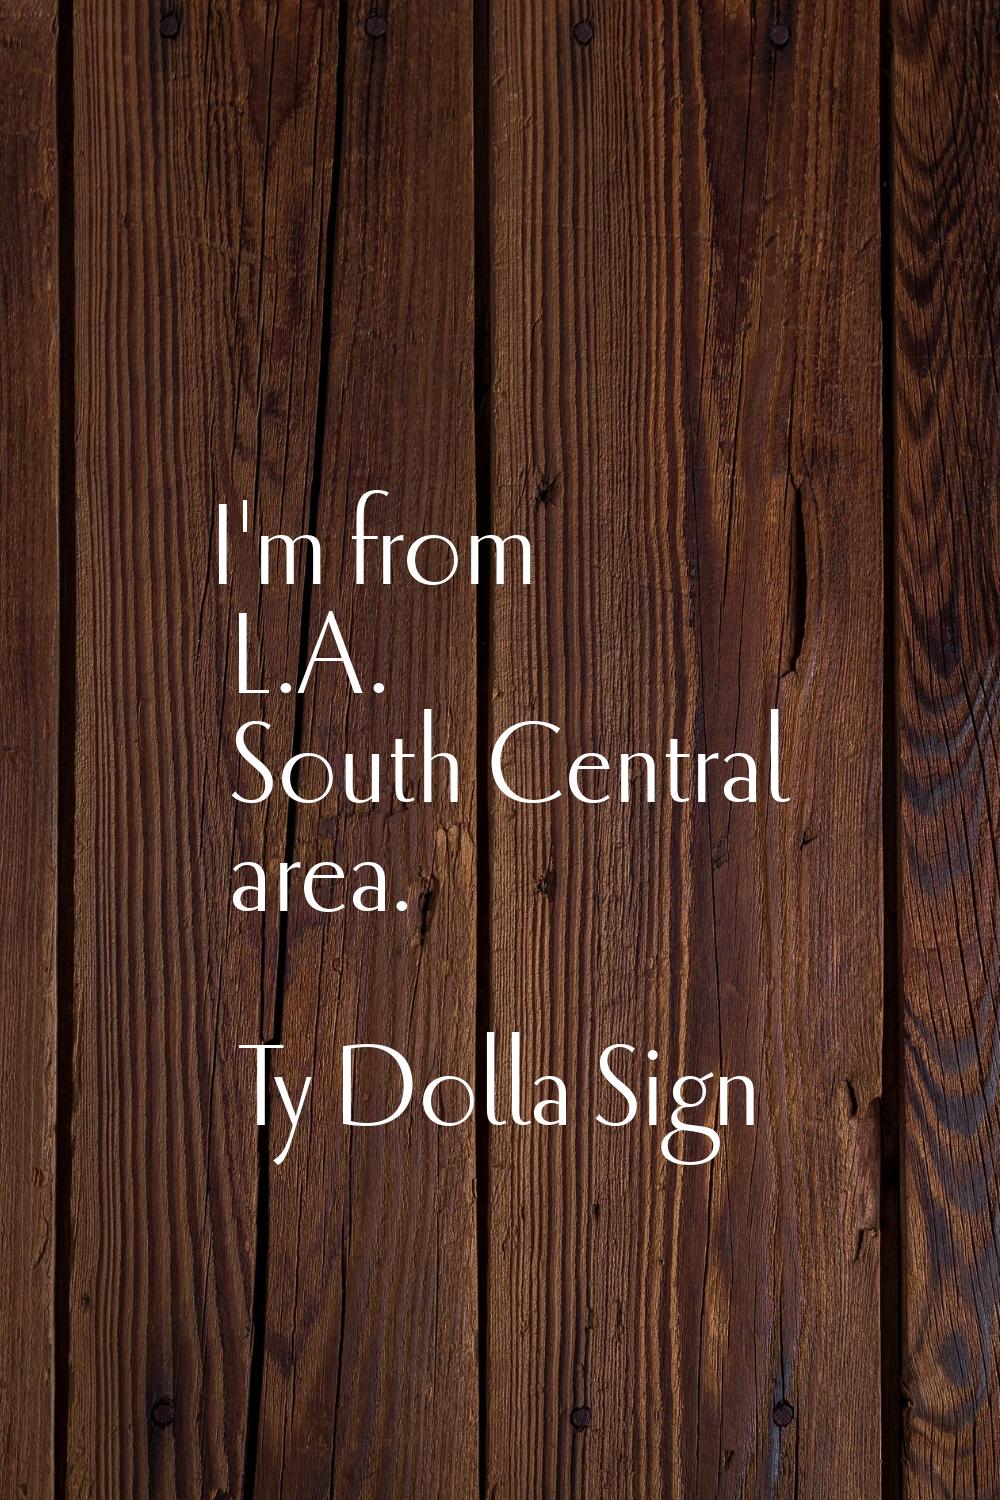 I'm from L.A. South Central area.